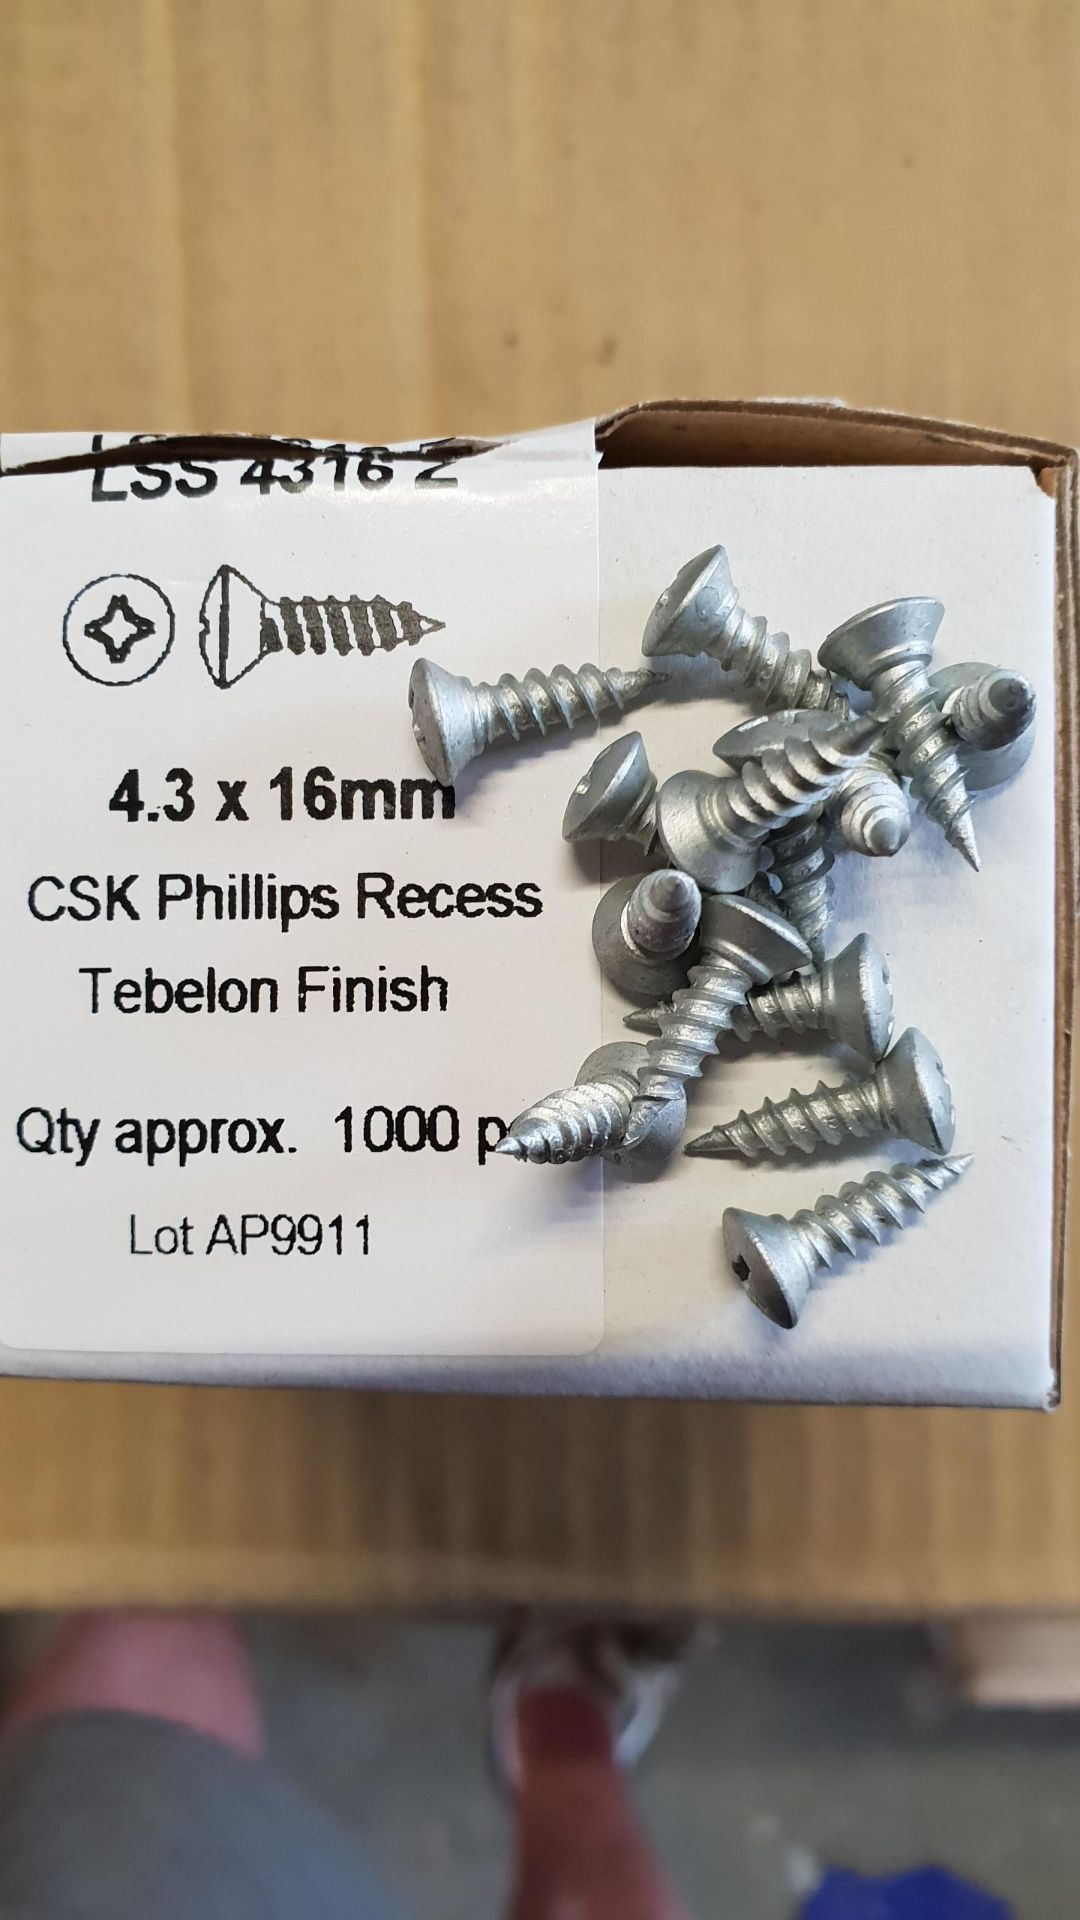 10 boxes - 4.3x16mm self tapping screws